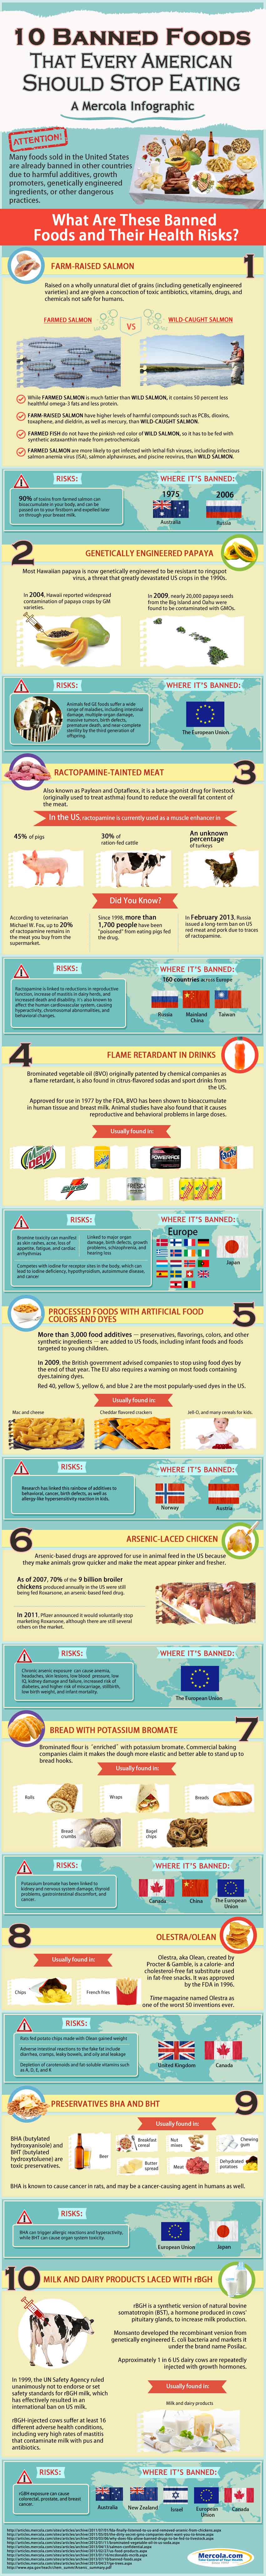 banned foods infographic